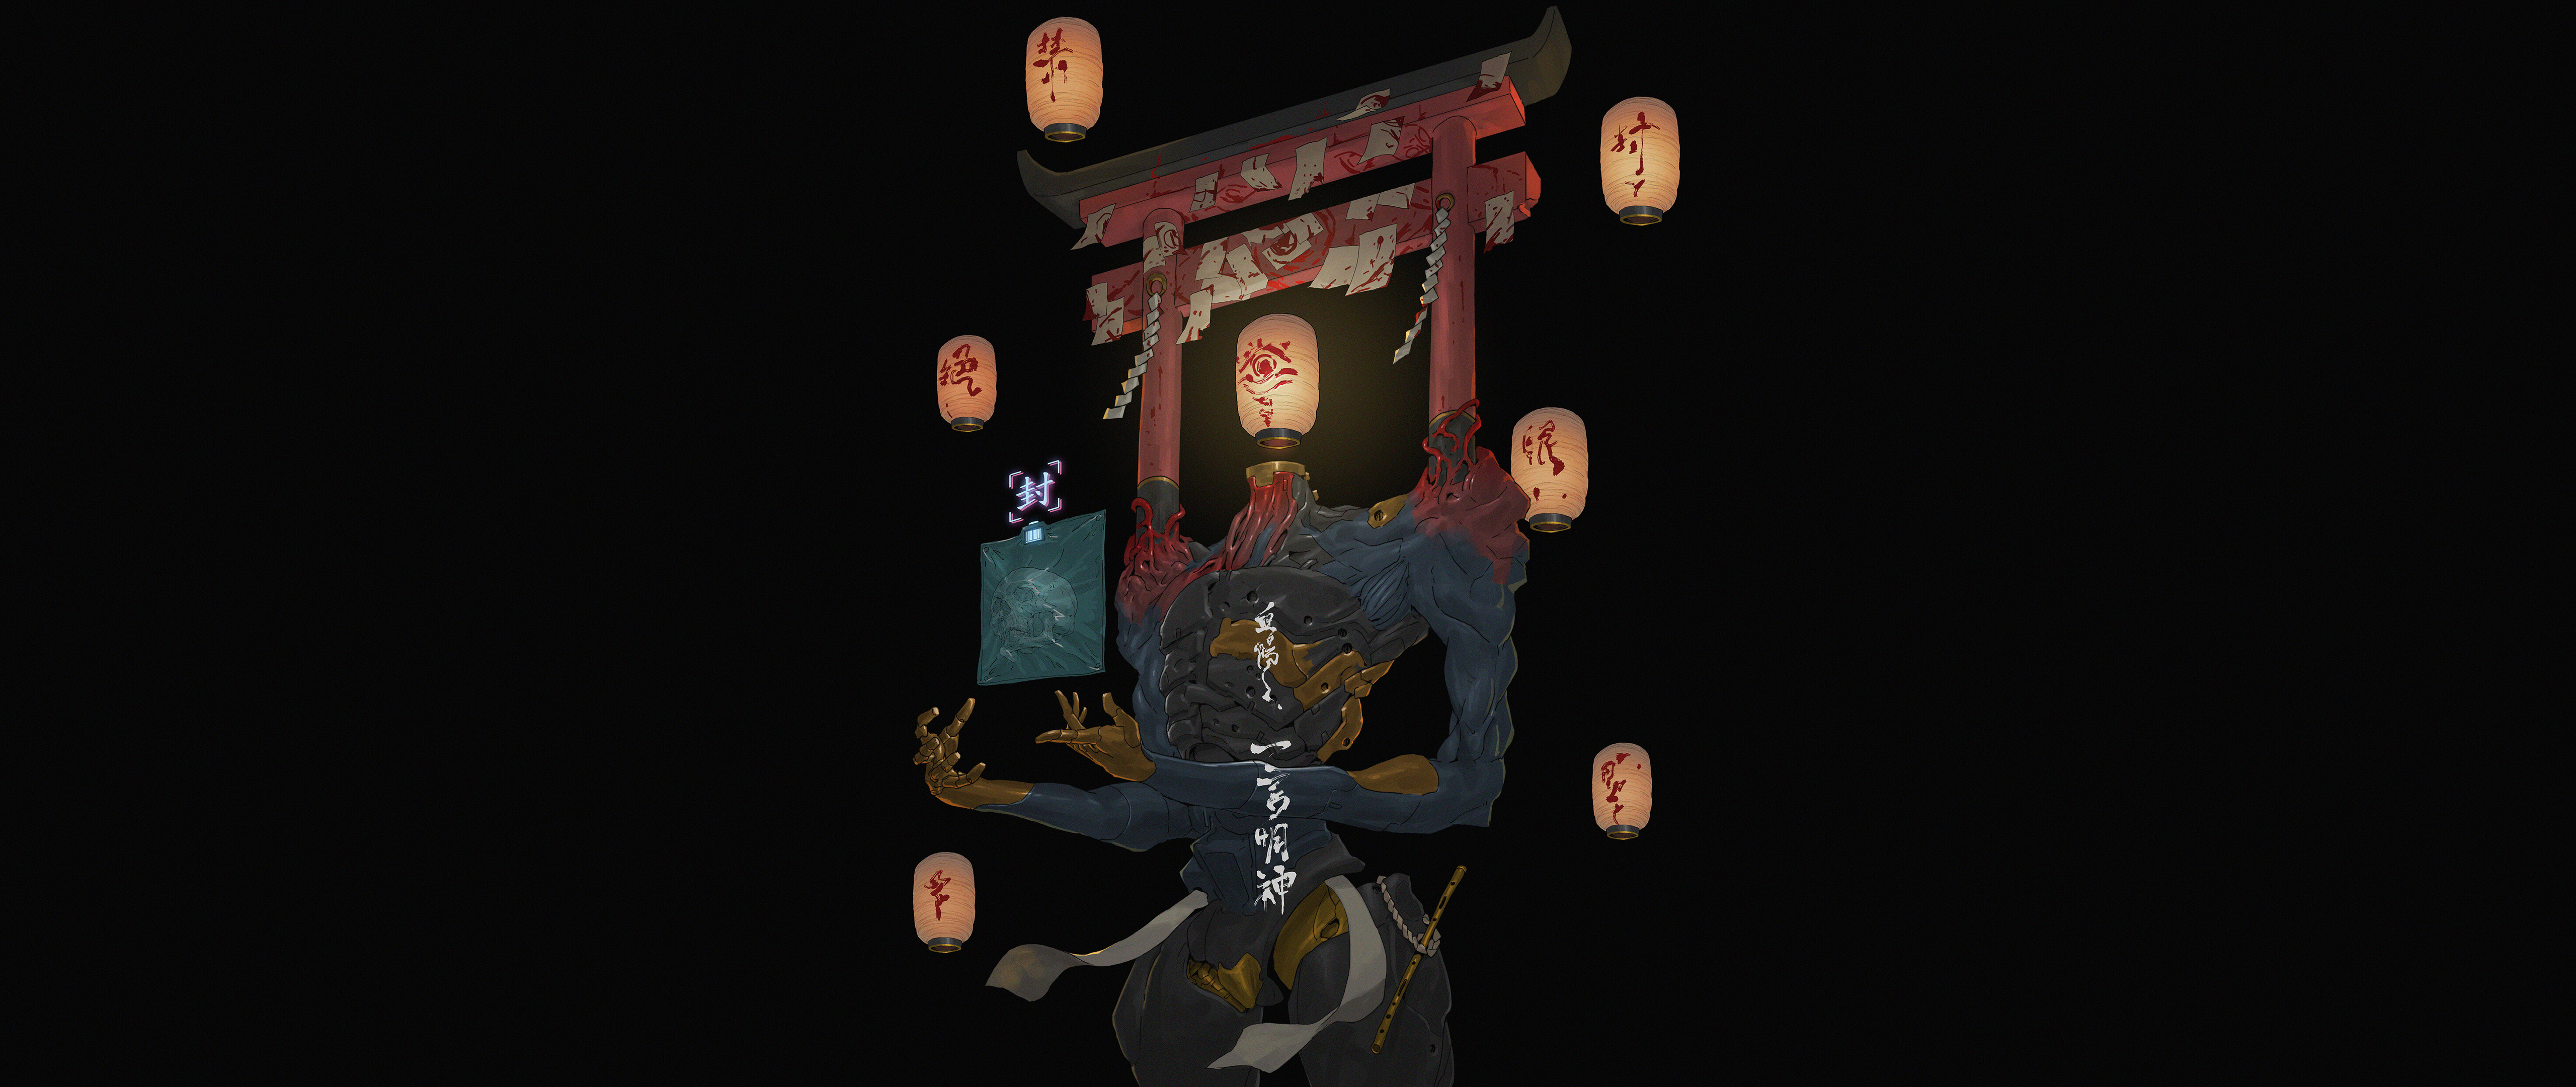 Undead Ching Yeh 5120x2160